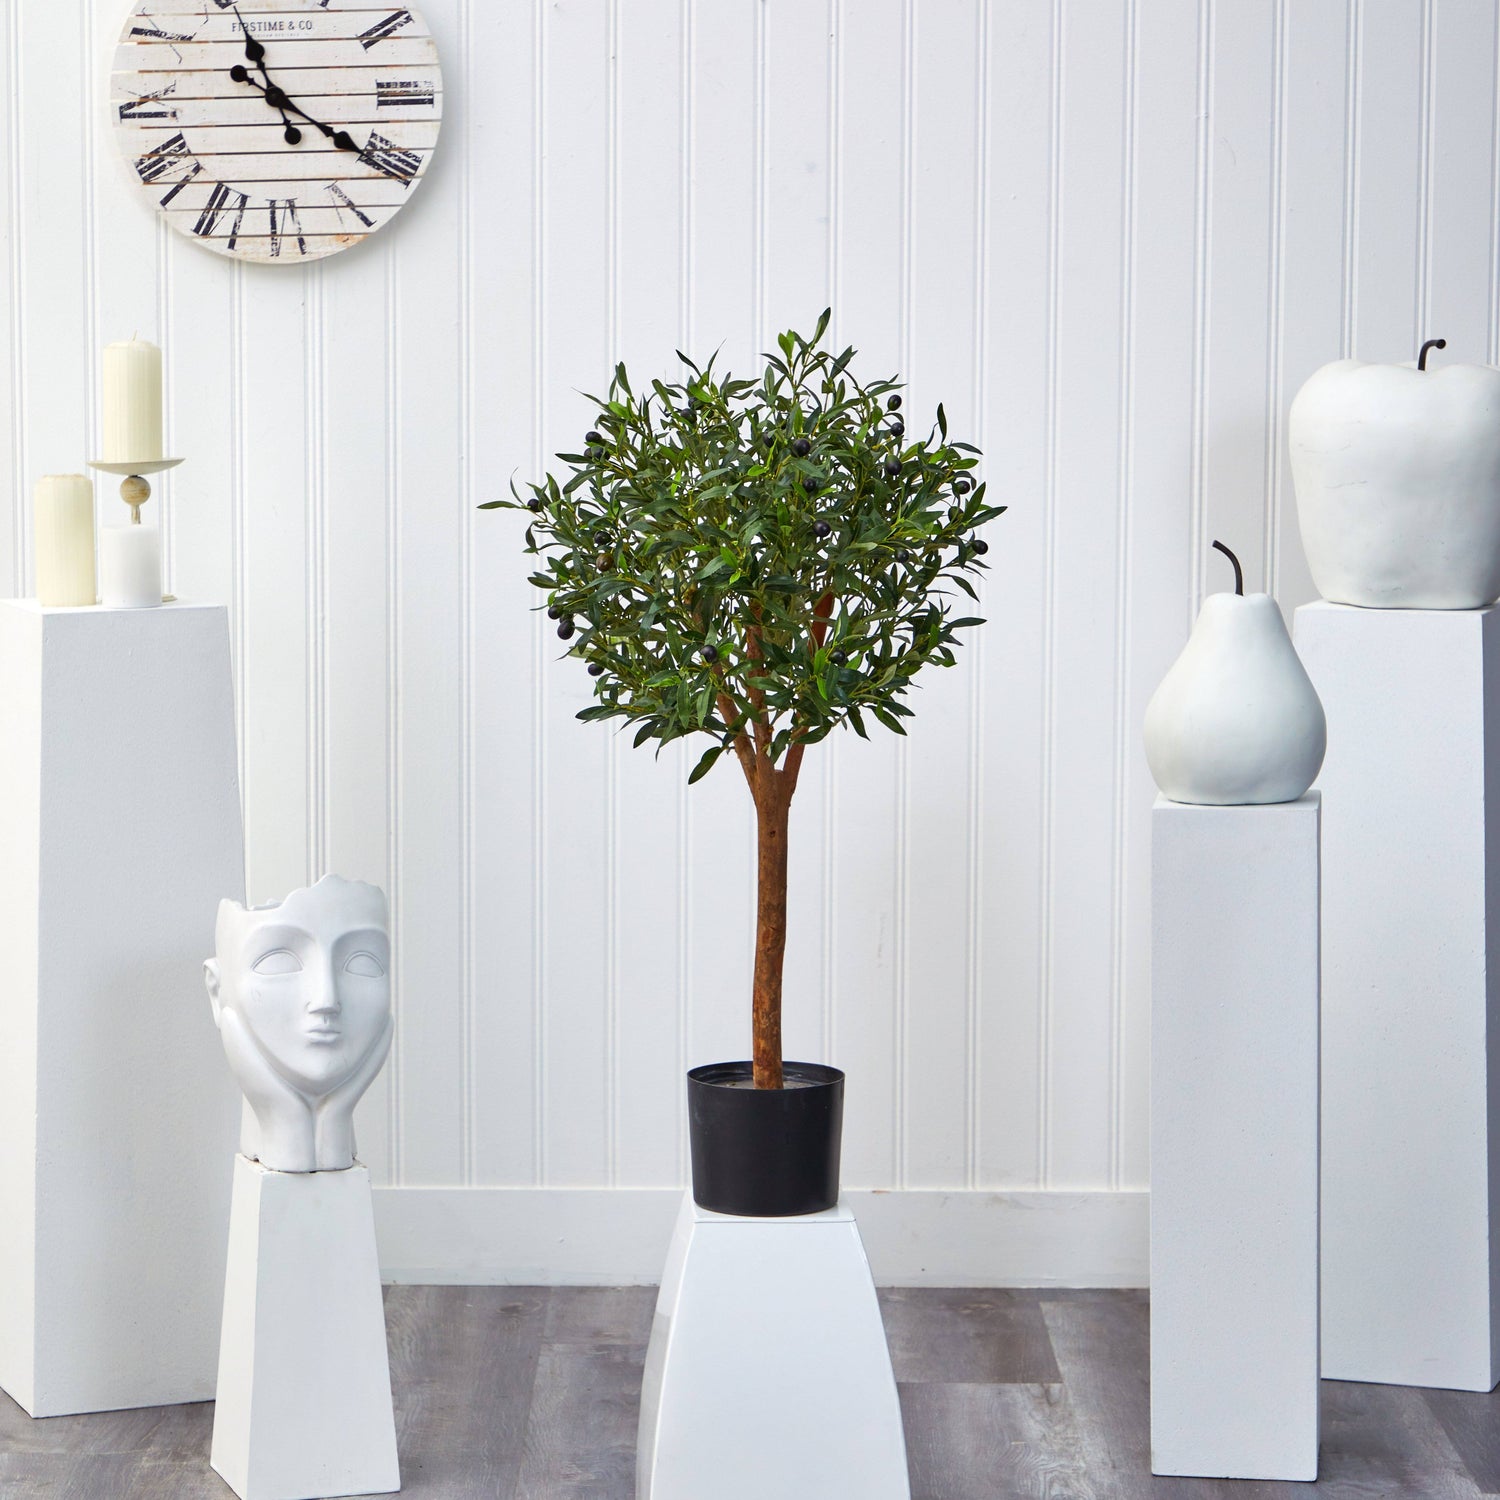 3.5’ Olive Artificial Tree in Nursery Planter